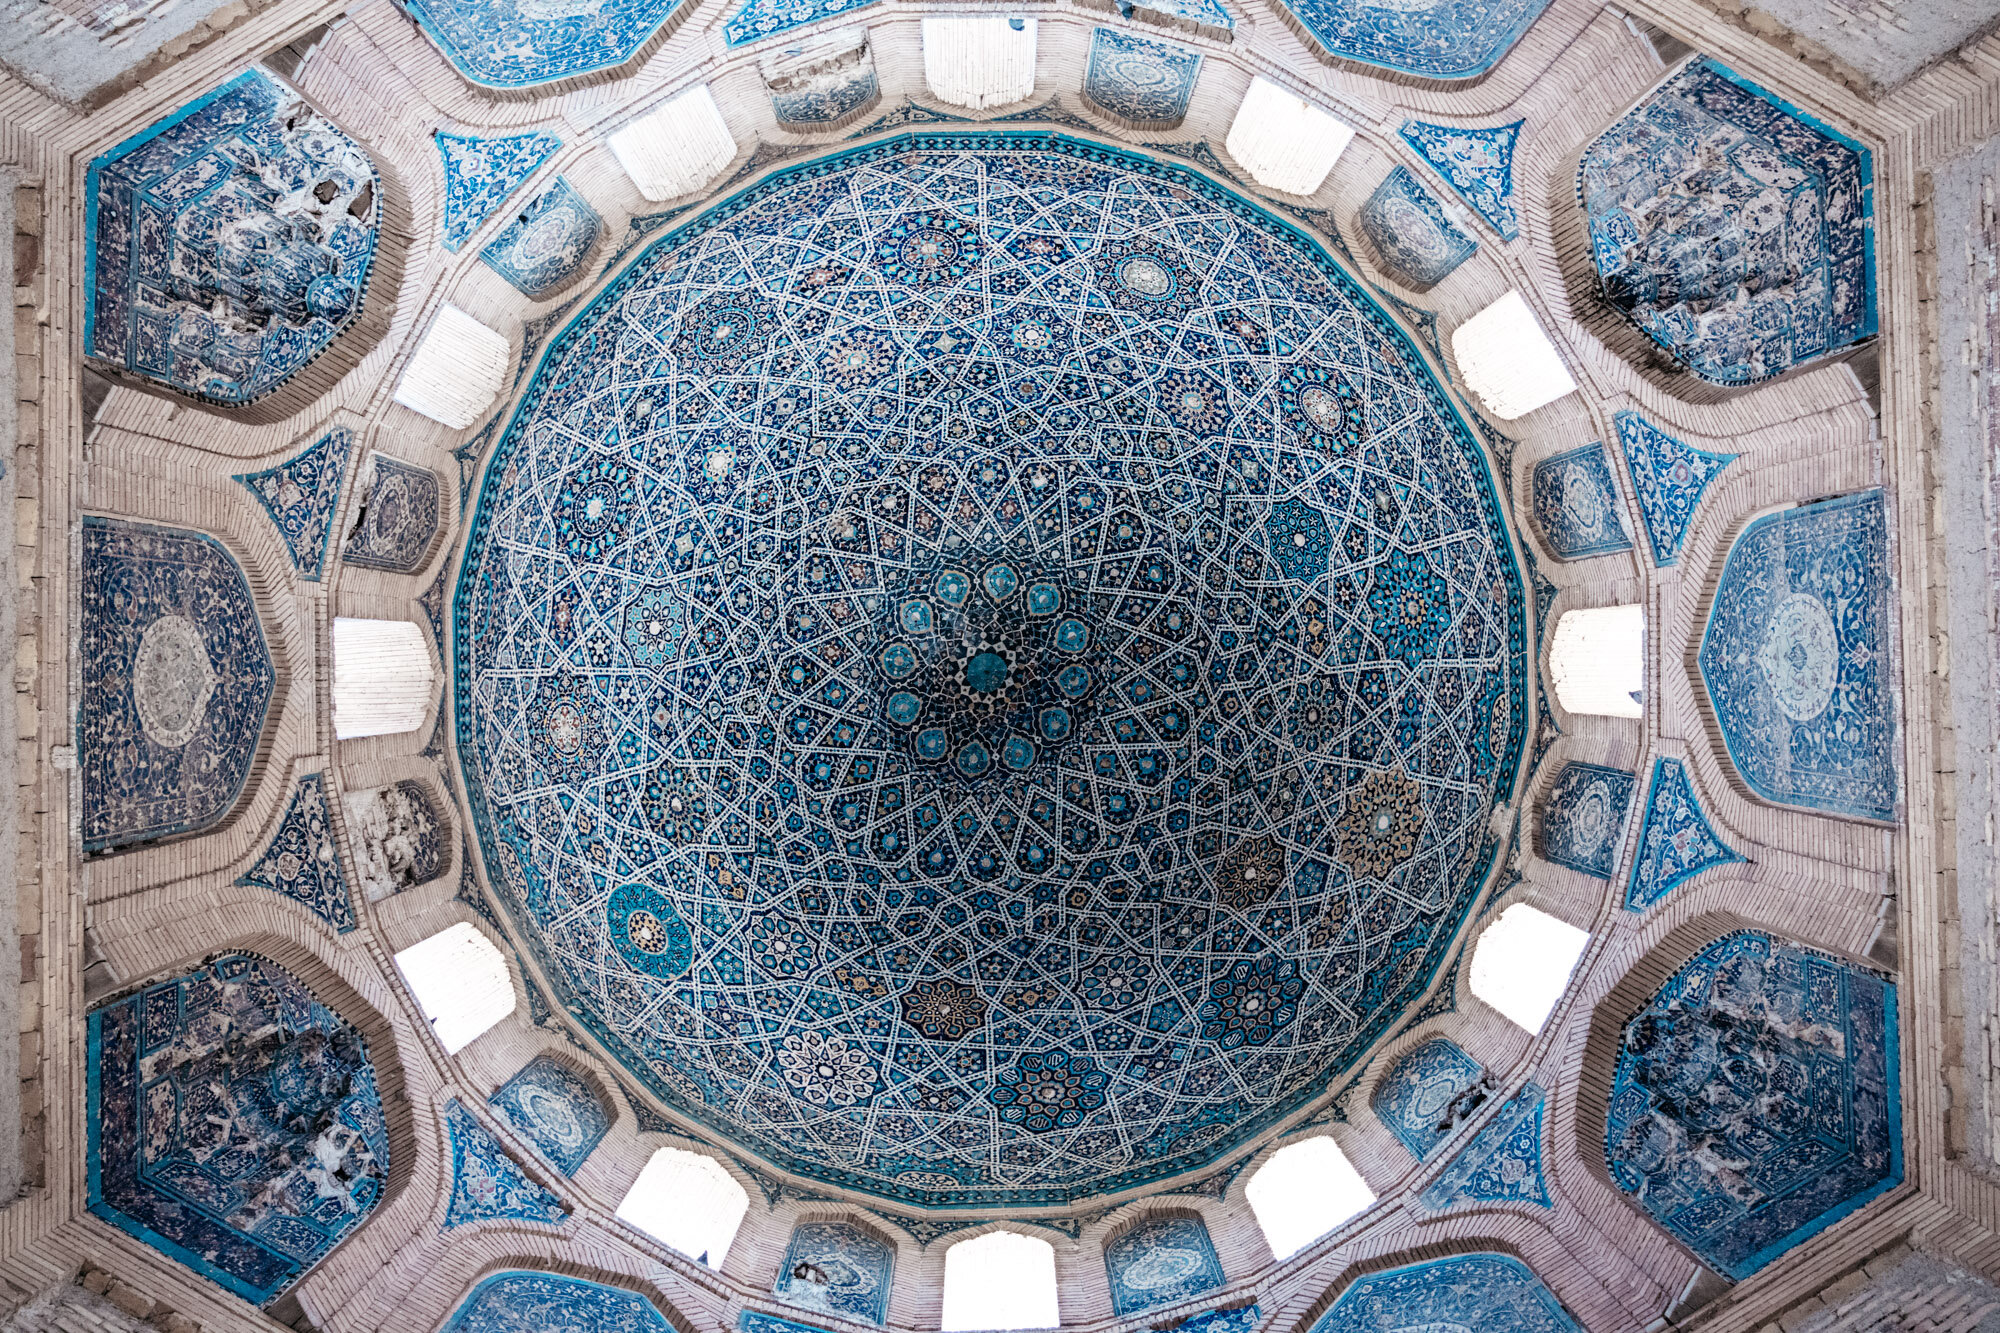  Inside of the dome of the Turabek-Khanum Mausoleum. The surface is covered in colourful mosaic which forms intricate ornamental patterns consisting of flowers and stars, creating a visual metaphor for the heavens. 